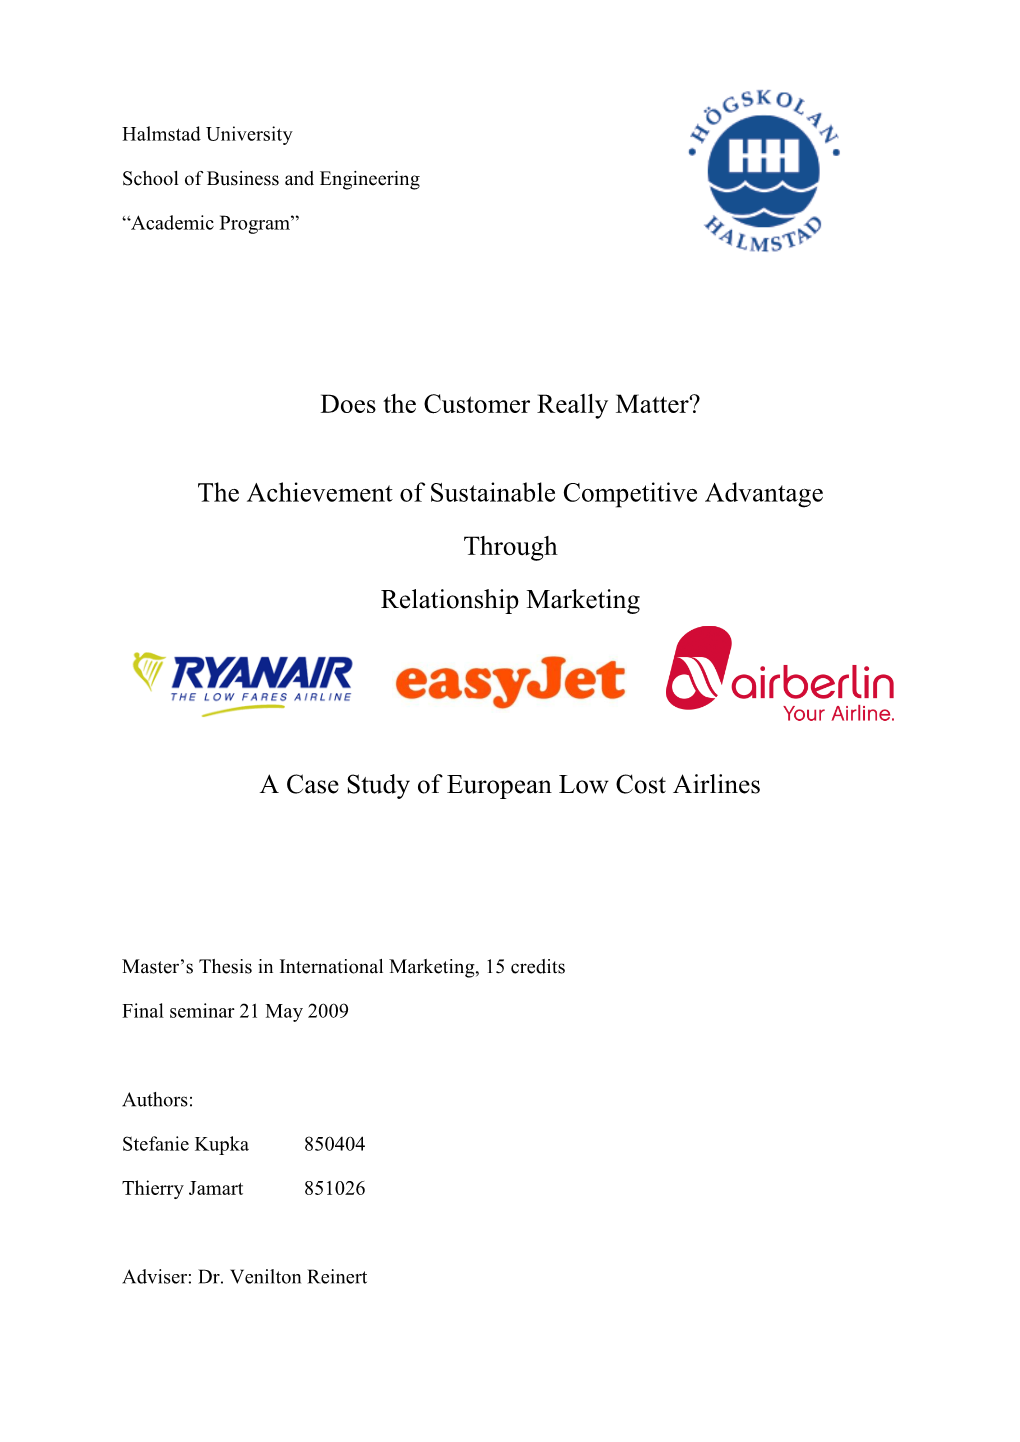 Relationship Marketing in Low Cost Airlines